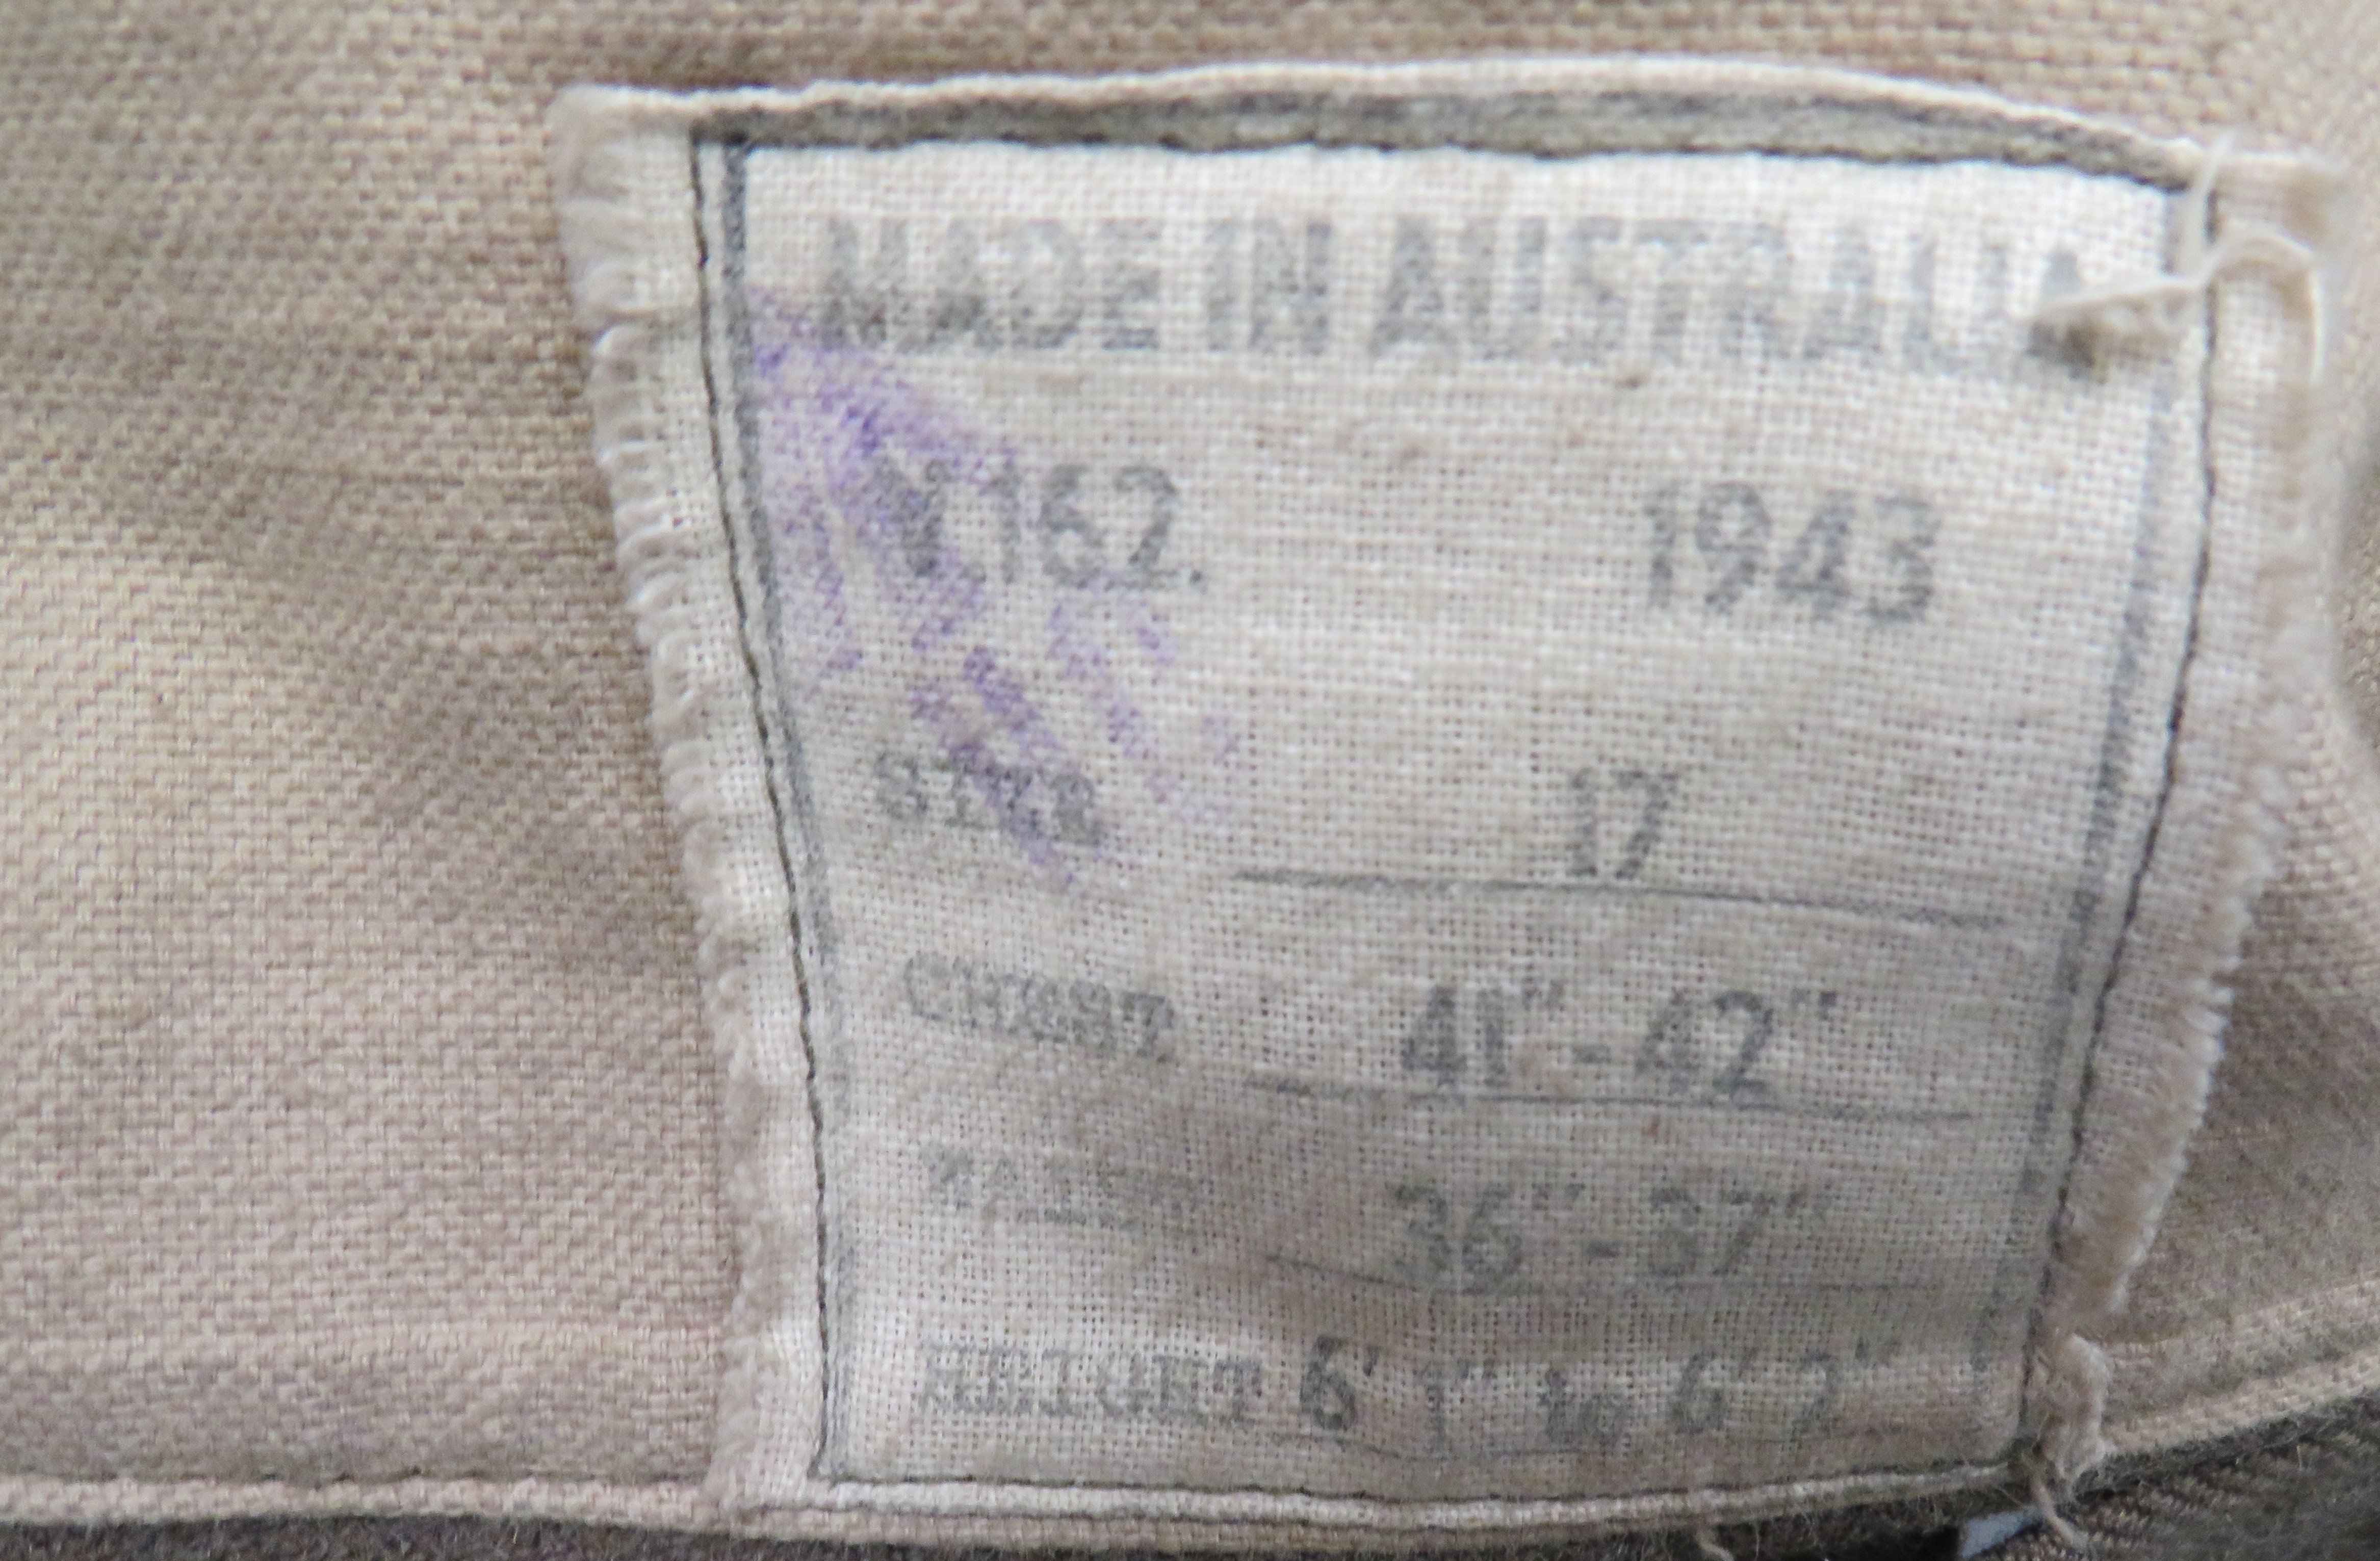 WW2 Australian Made Battledress Jacket And Trousers 78th Inf Div consisting khaki green, open - Image 2 of 2